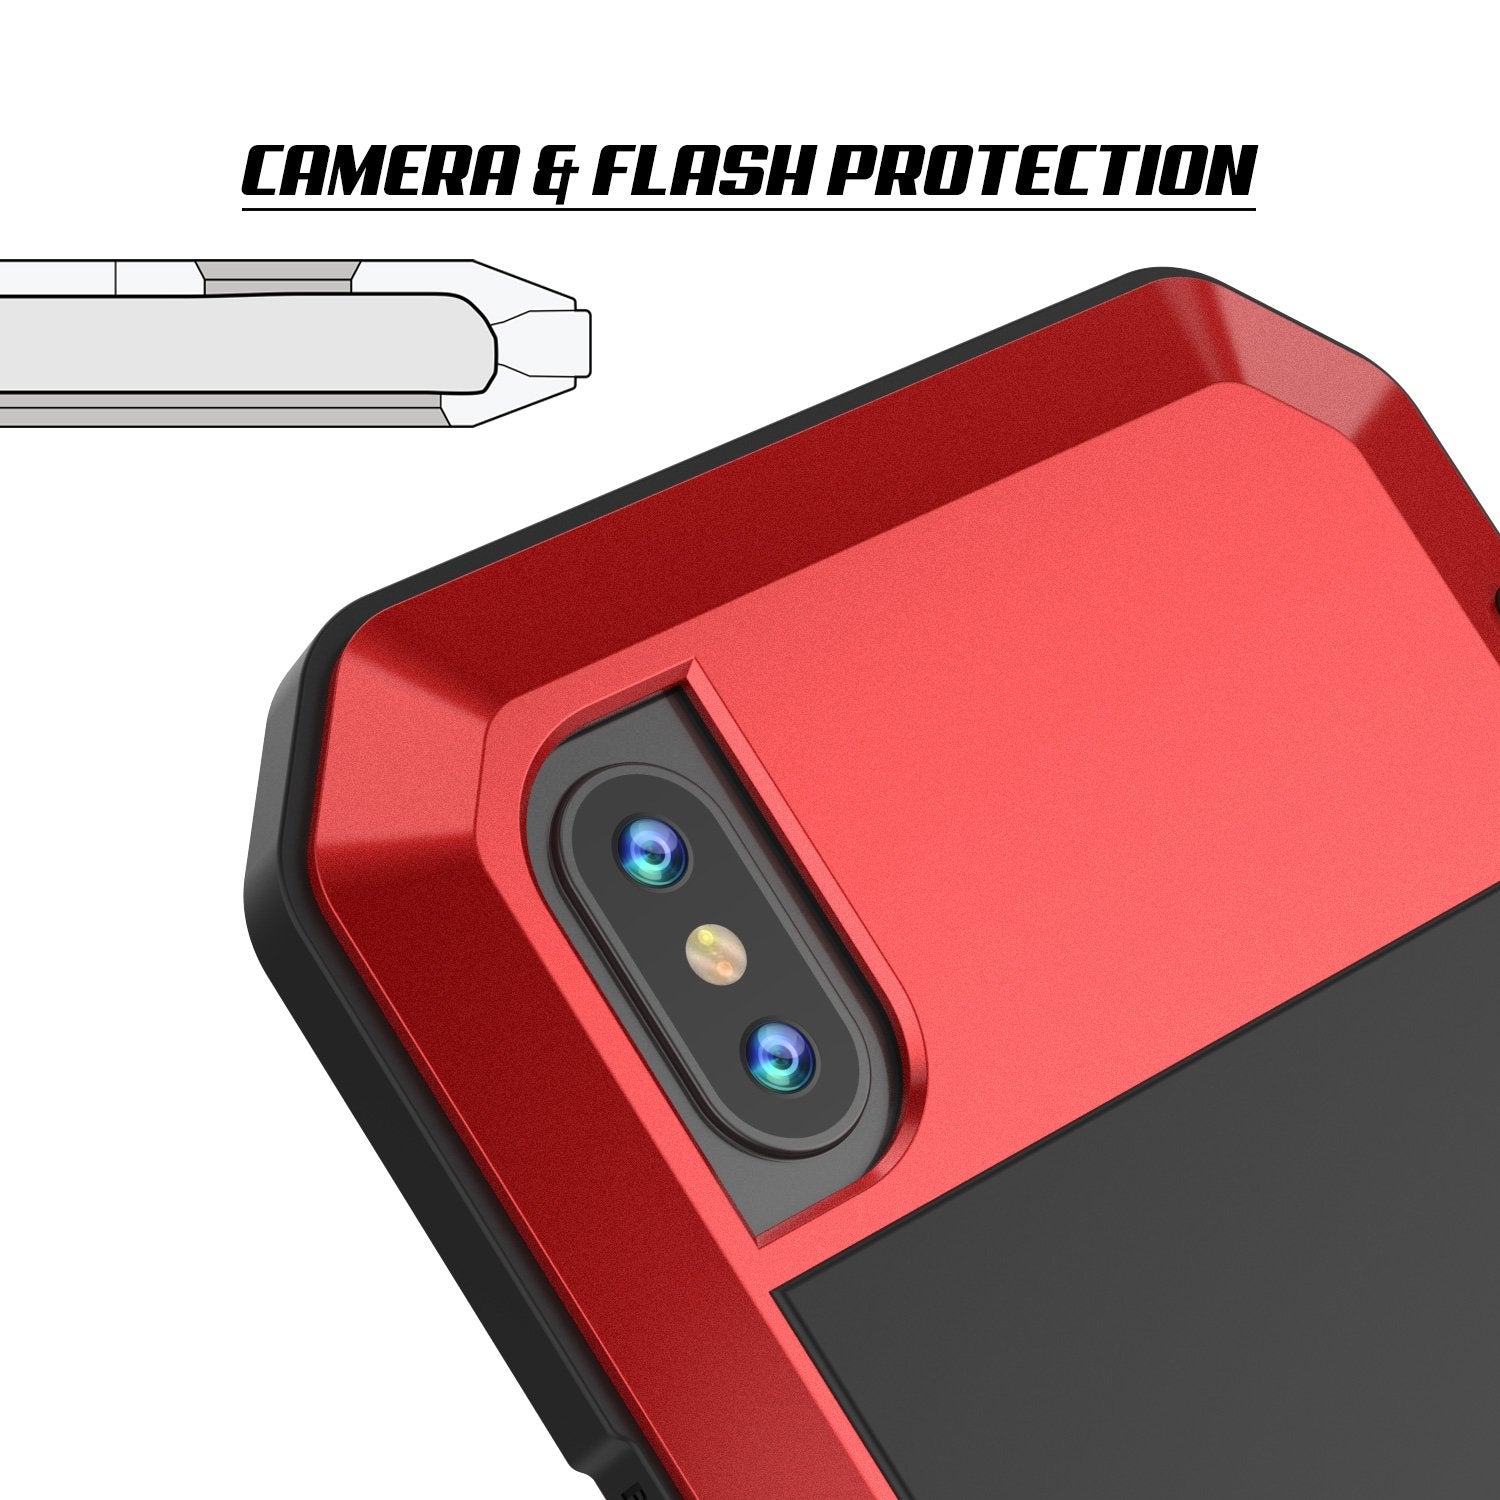 iPhone X Metal Case, Heavy Duty Military Grade Rugged Red Armor Cover [shock proof] Hybrid Full Body Hard Aluminum & TPU Design - PunkCase NZ